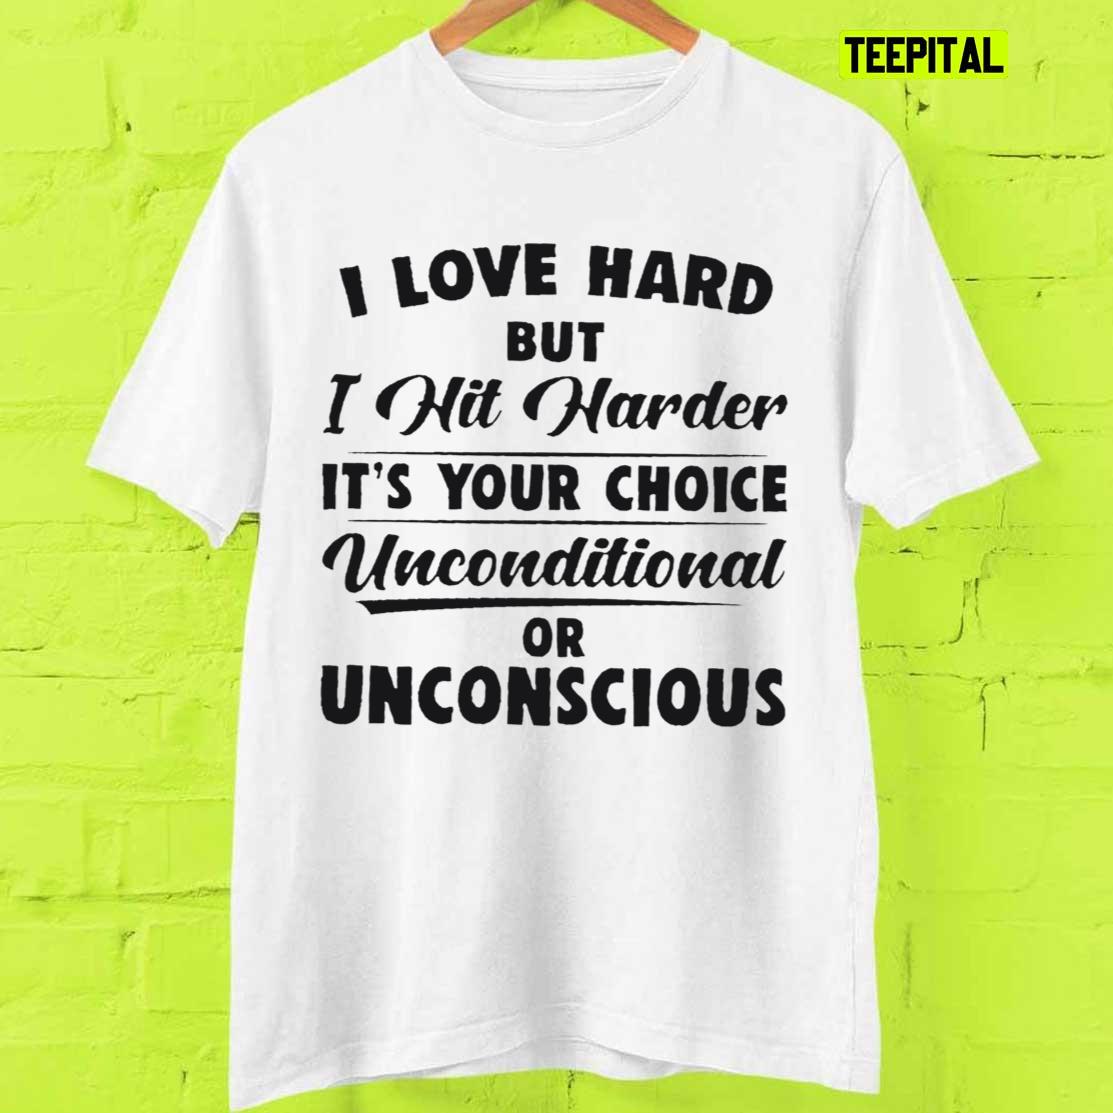 I Love Hard But I Hit Harder It’s Your Choice Unconditional Or Unconscious T-Shirt